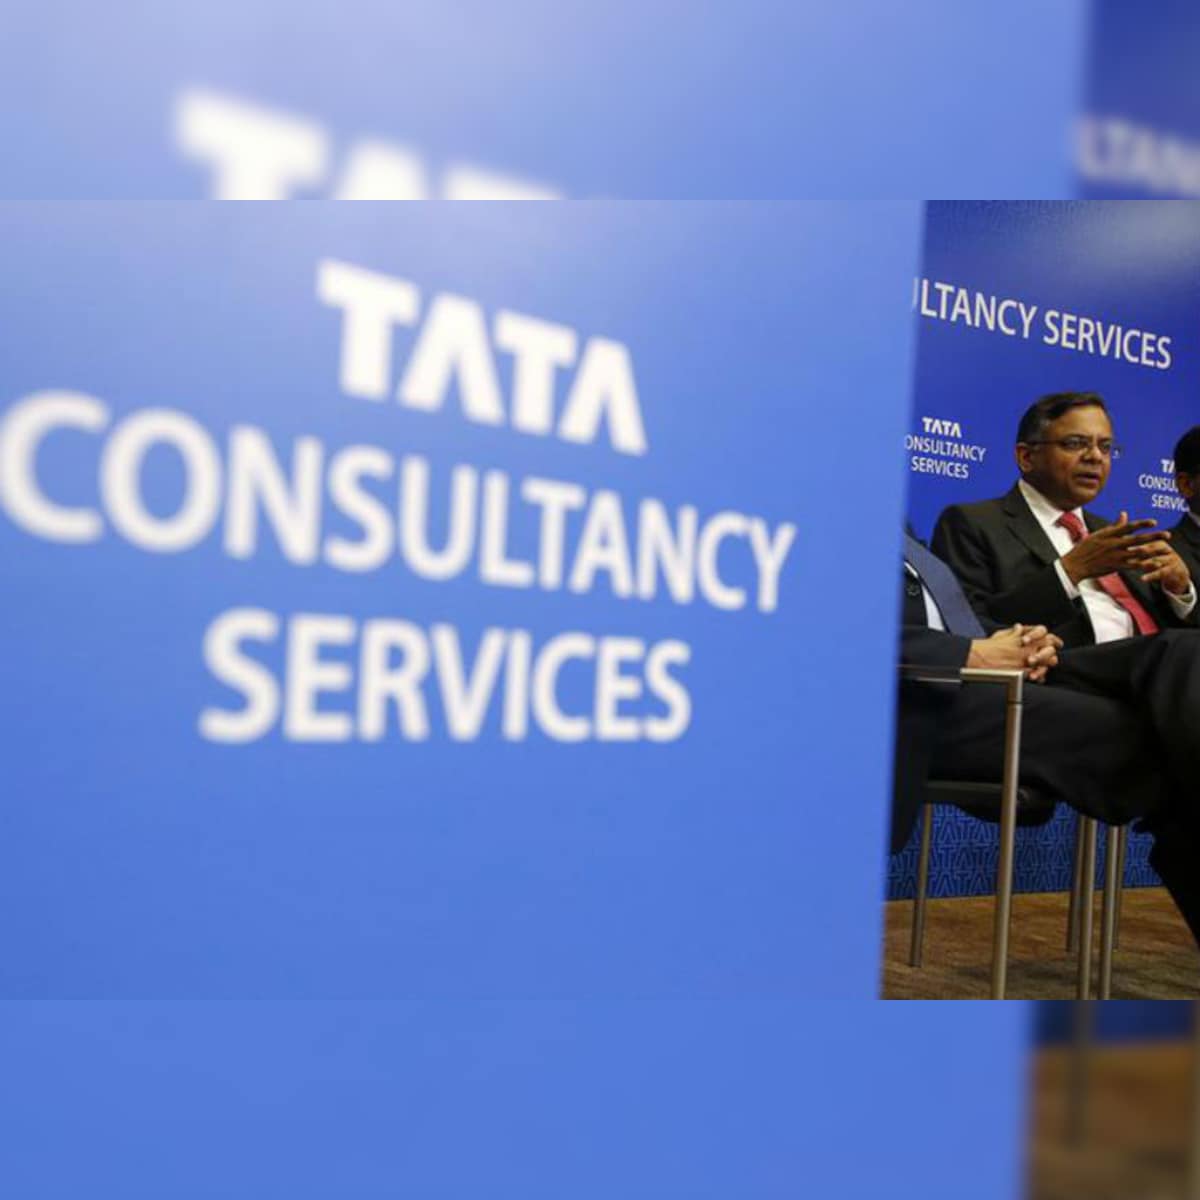 TCS Ranked As a Top Employer of US Talent in The IT Services Sector